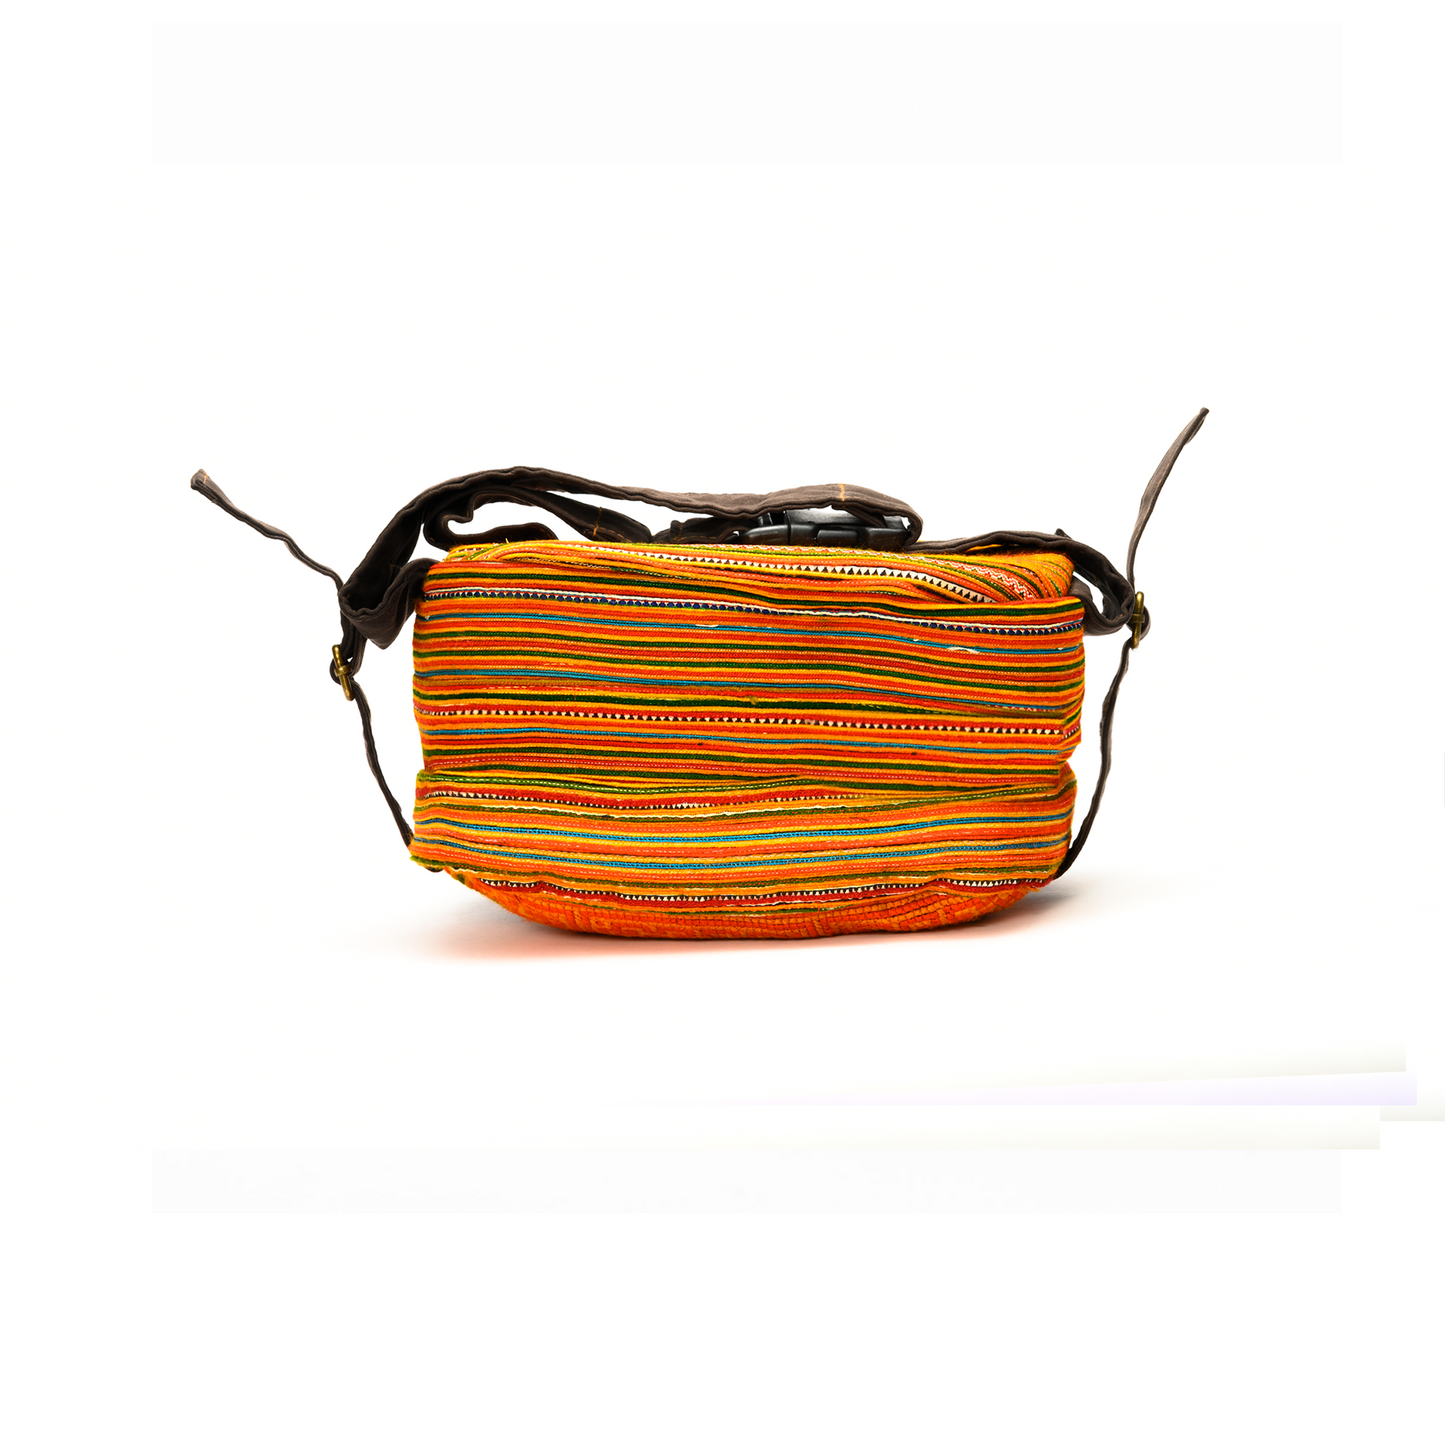 Bright Orange Waist bag, embroidery and faux leather